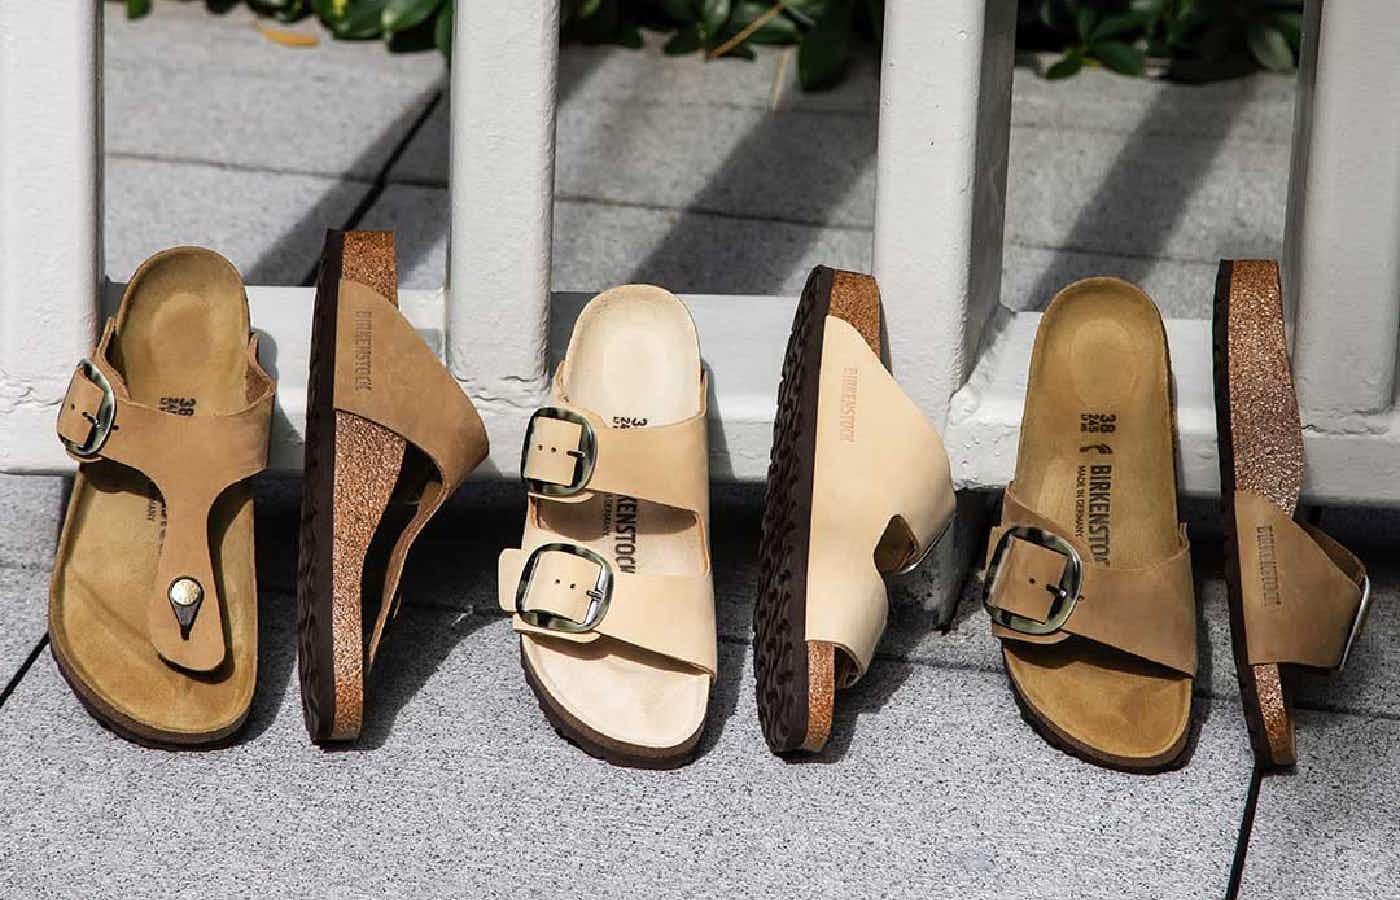 Three pairs of Birkenstock sandals displayed leaning up against a fence.